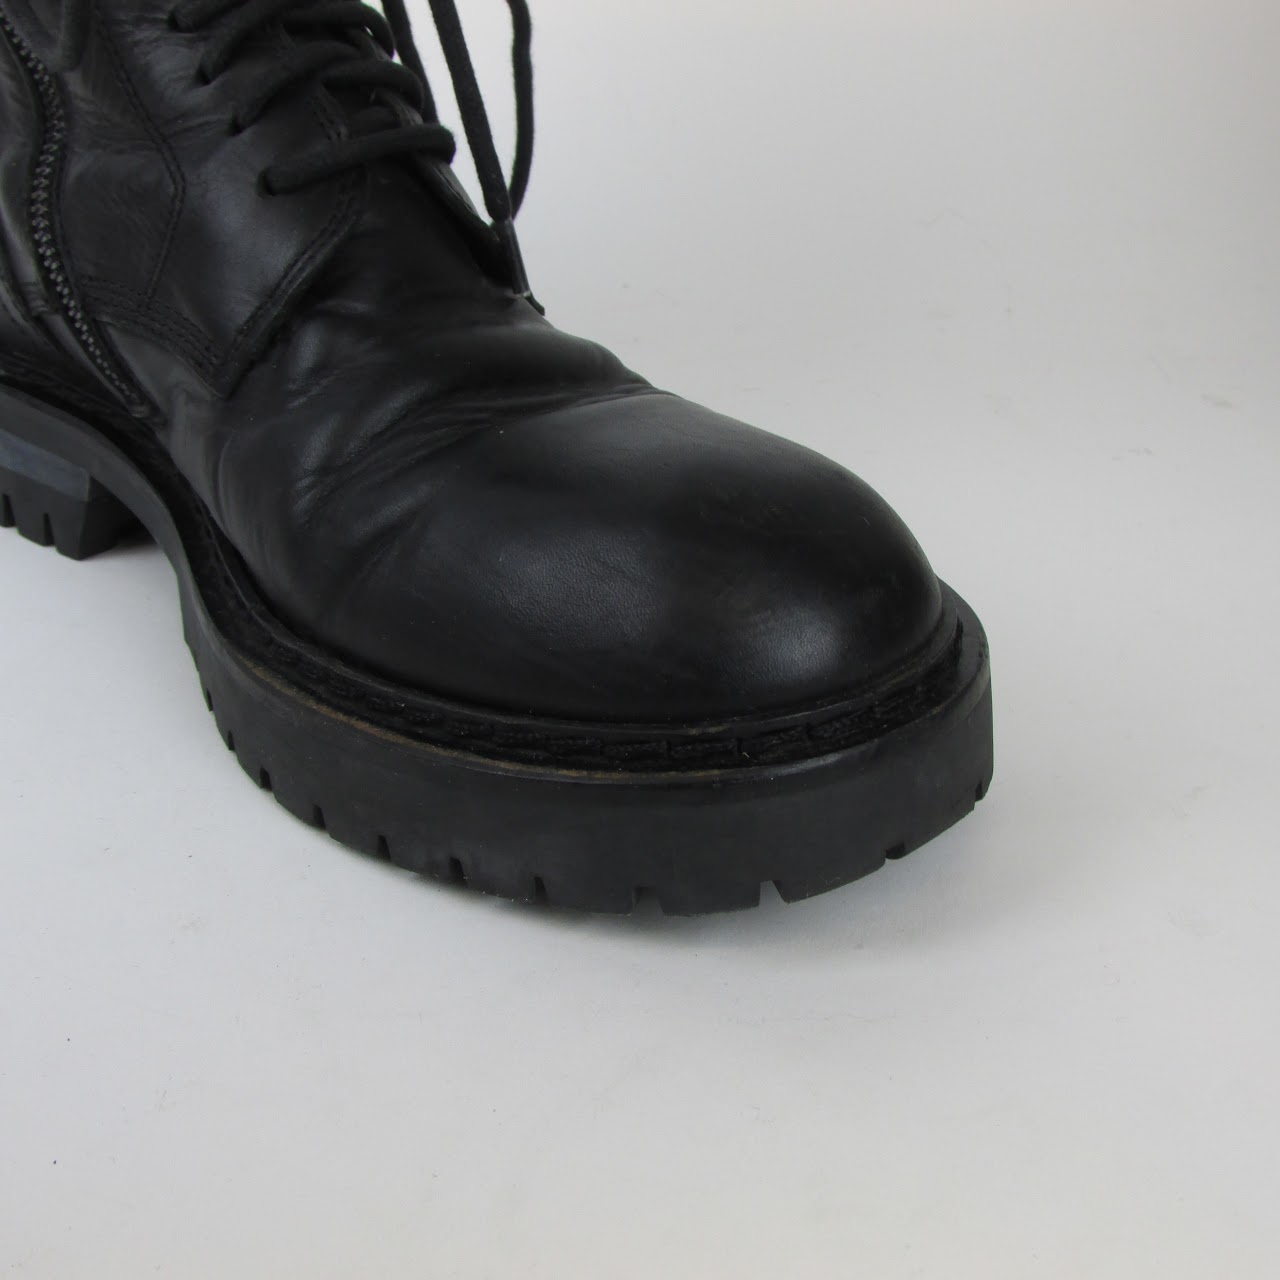 Ann Demeulemeester Lace-Up Boots